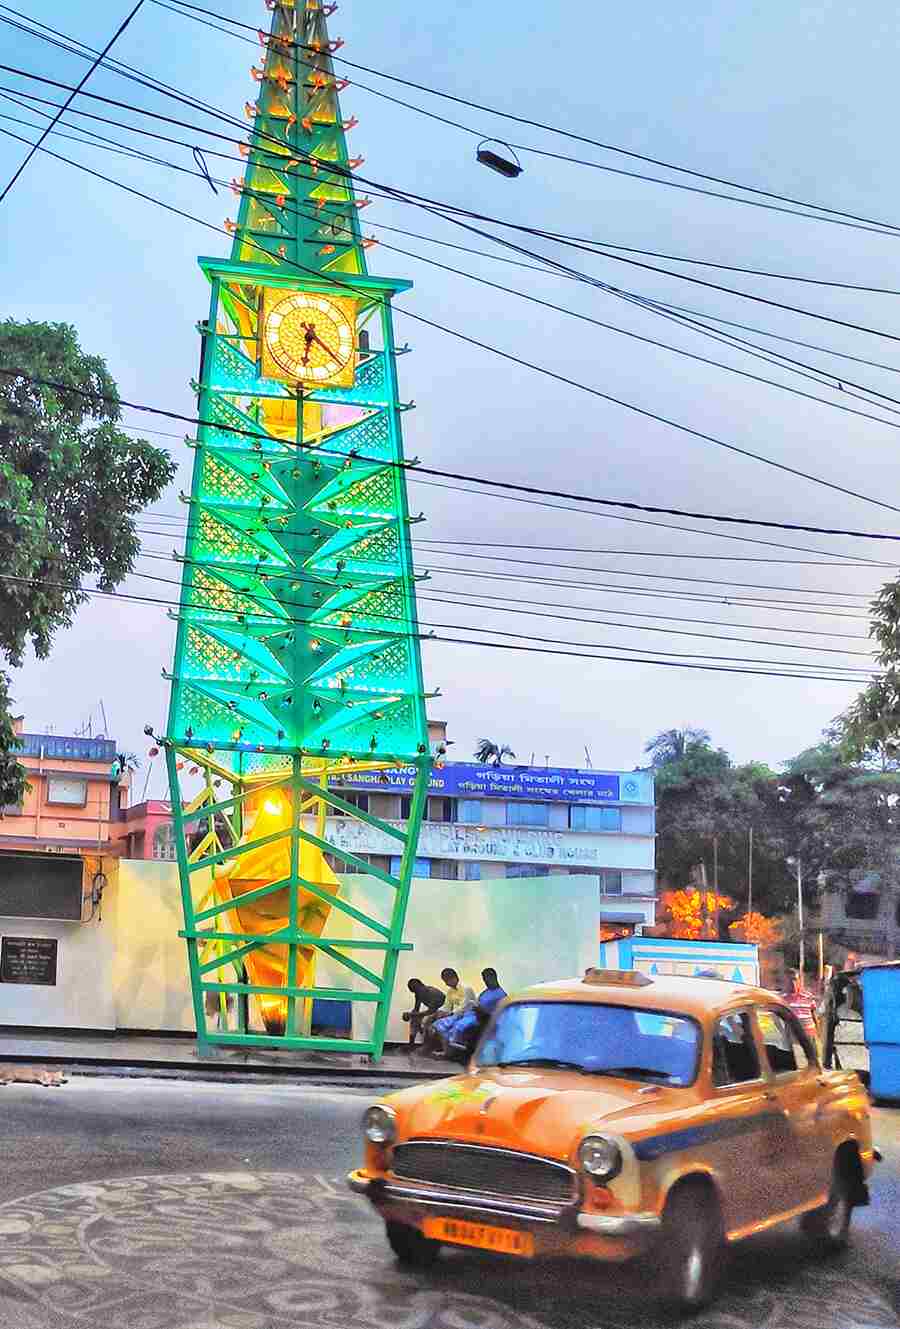 A 56ft-tall clock tower was recently inaugurated in Garia